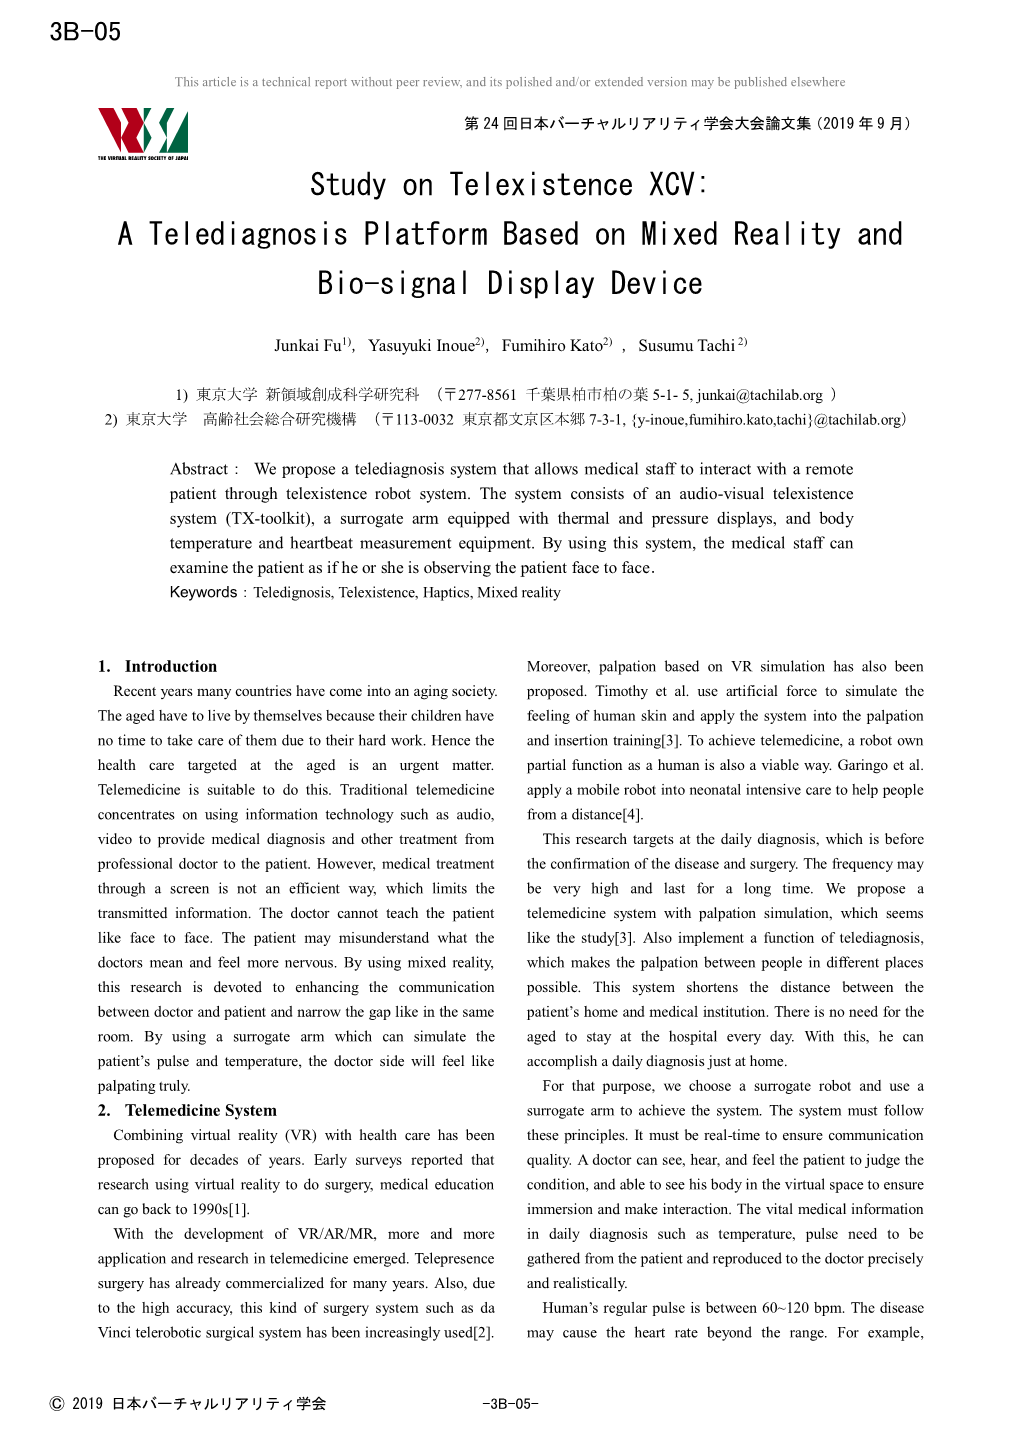 Study on Telexistence XCV: a Telediagnosis Platform Based on Mixed Reality And